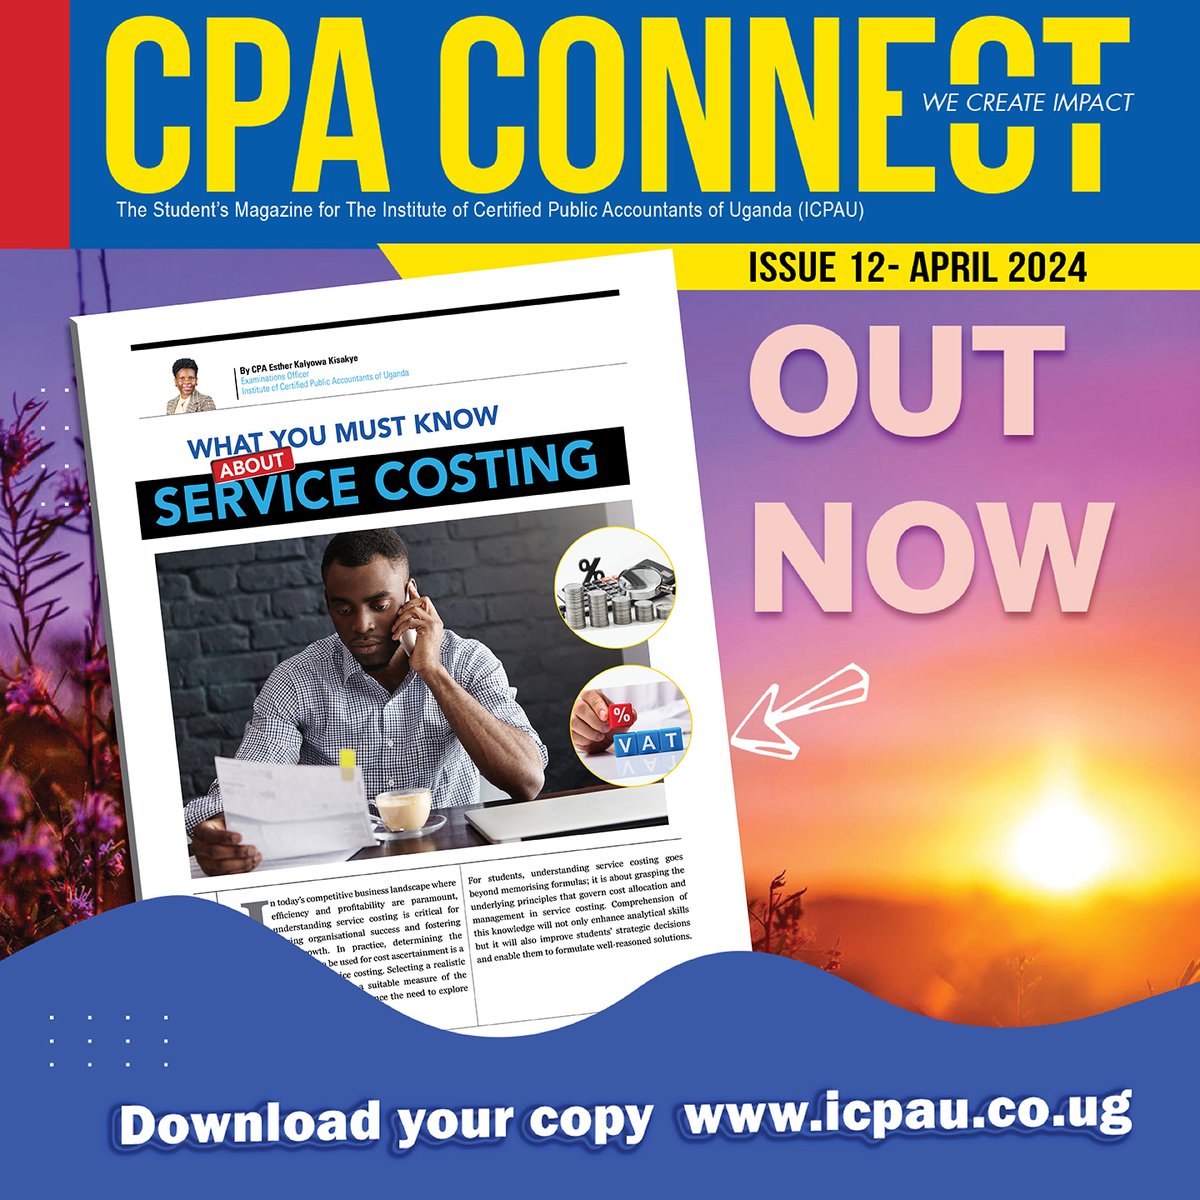 CPA Esther Kalyowa Kisakye provides a breakdown of service-costing essentials for students in the latest issue of CPA Connect Magazine.

Download your copy today: bit.ly/CPAConnect12_

#CPAConnect
#WeCreateImpact